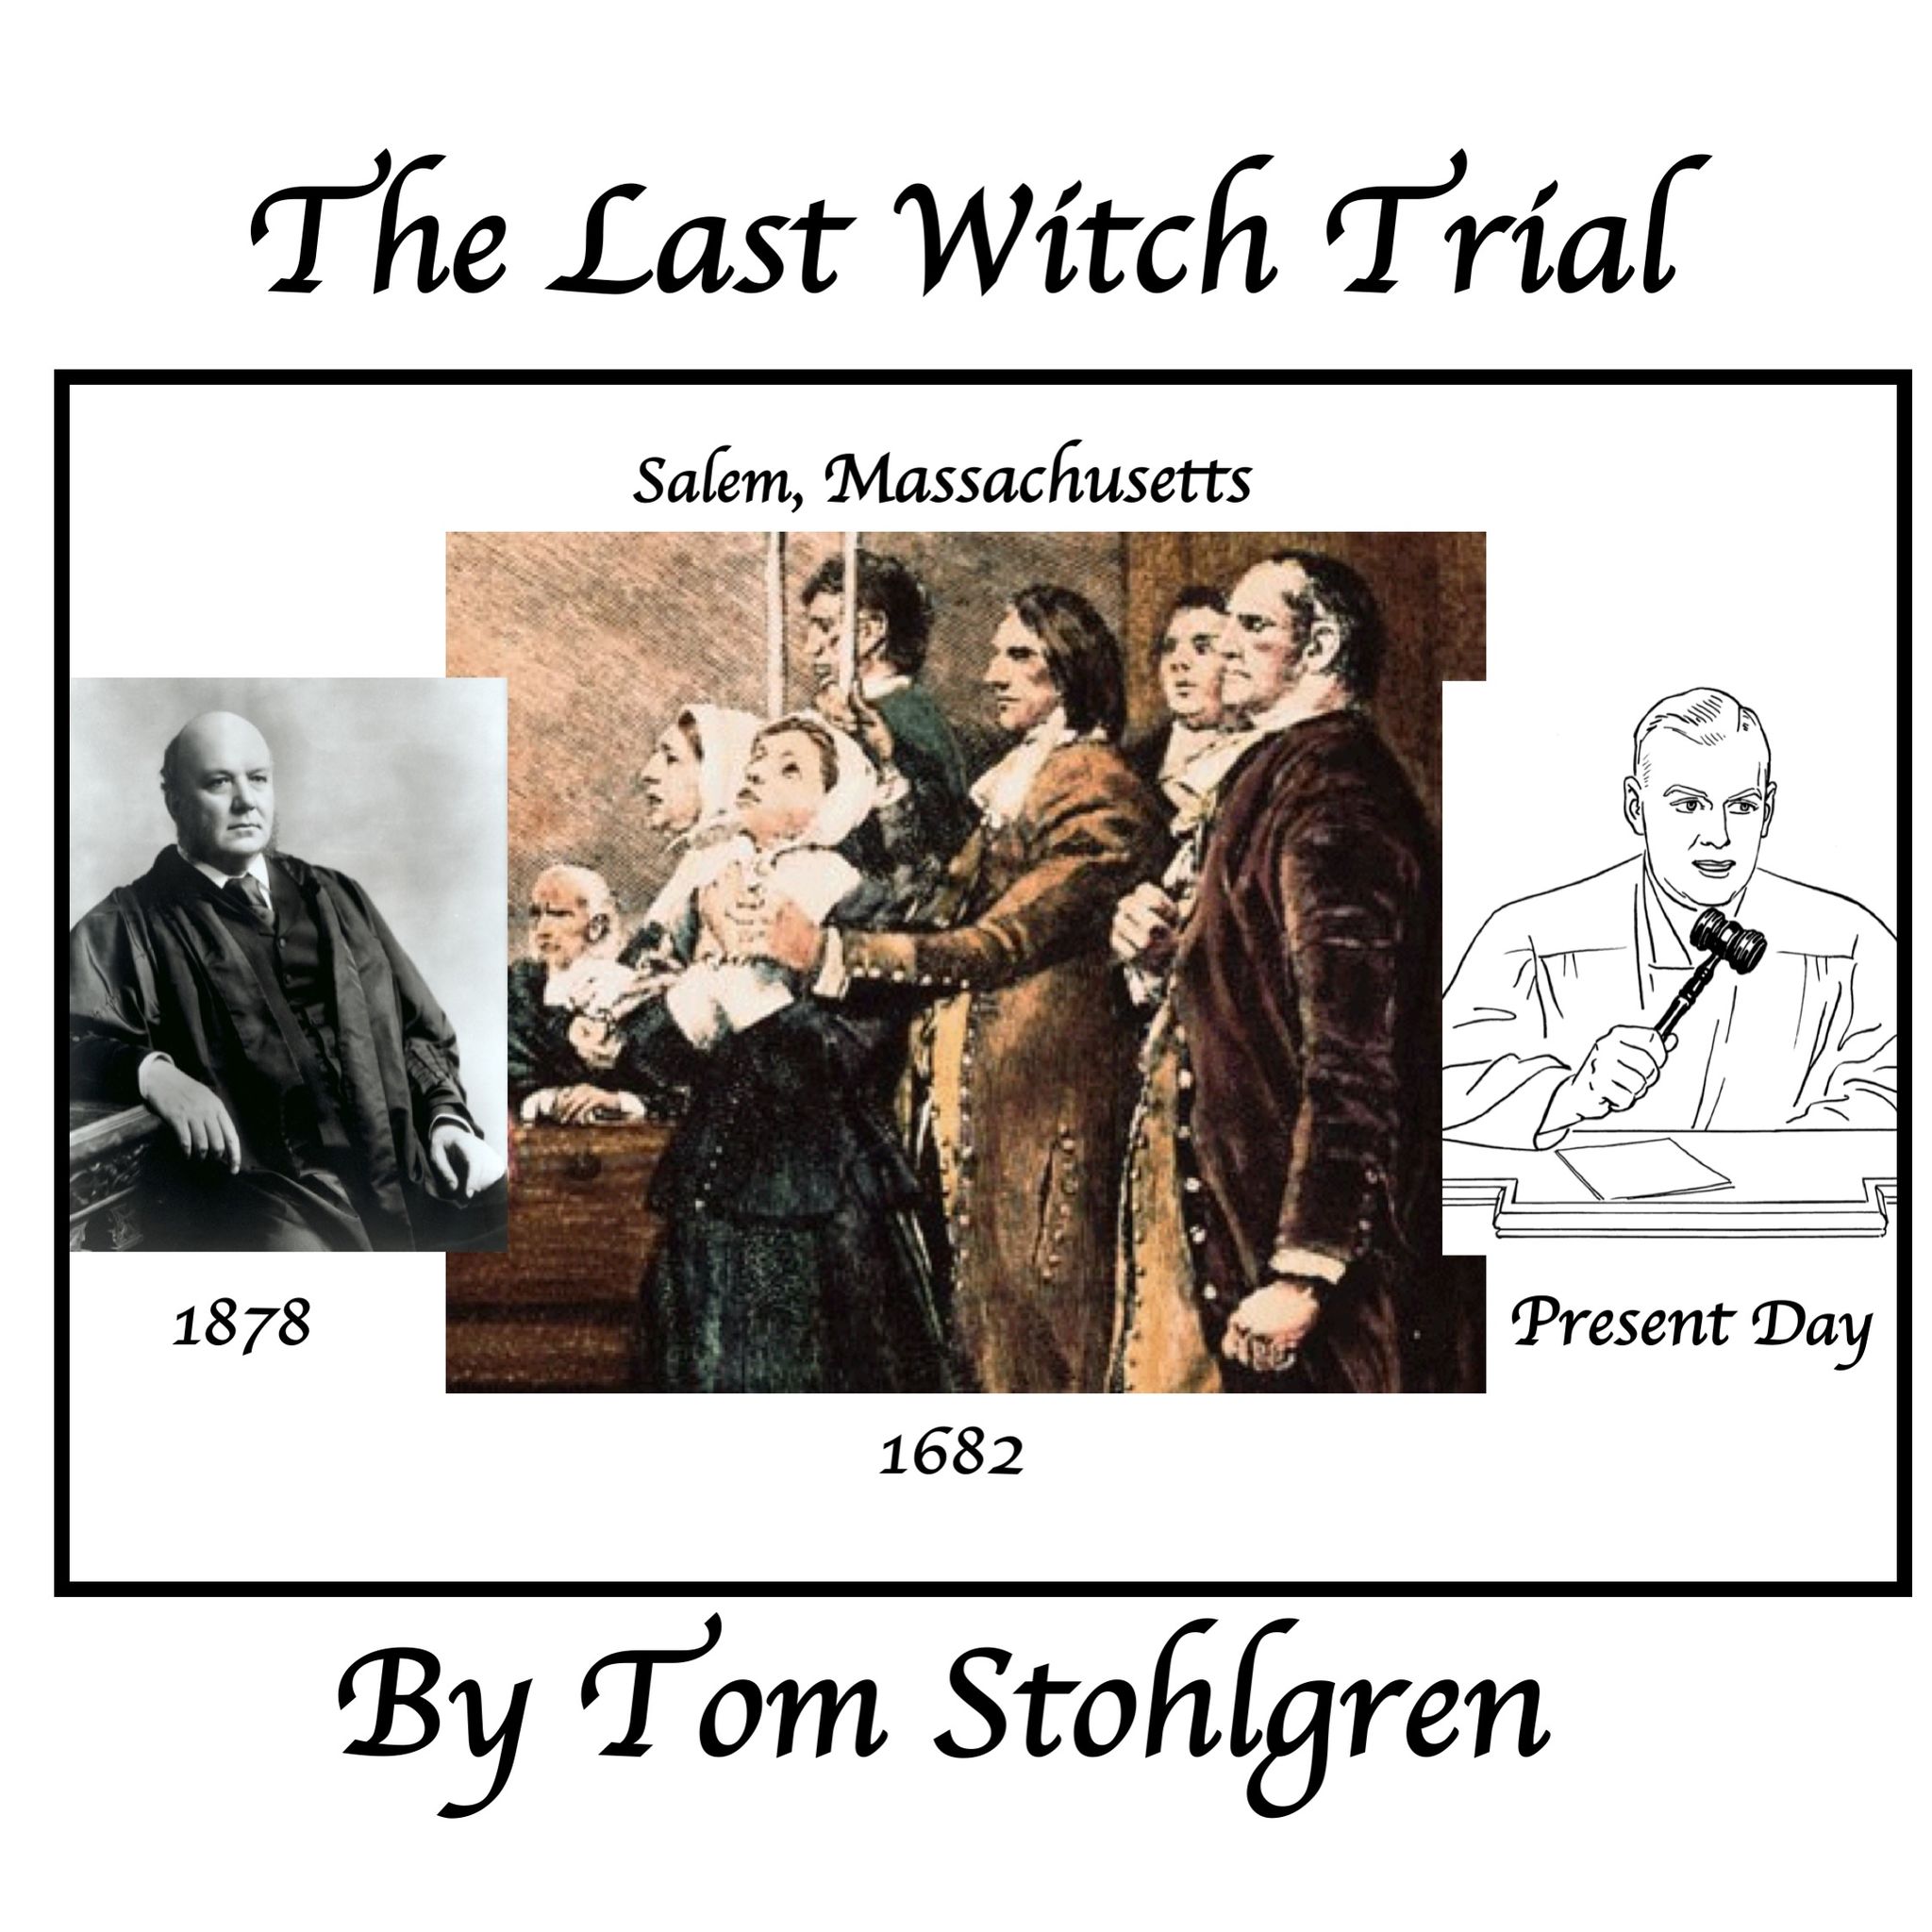 THE LAST WITCH TRIAL